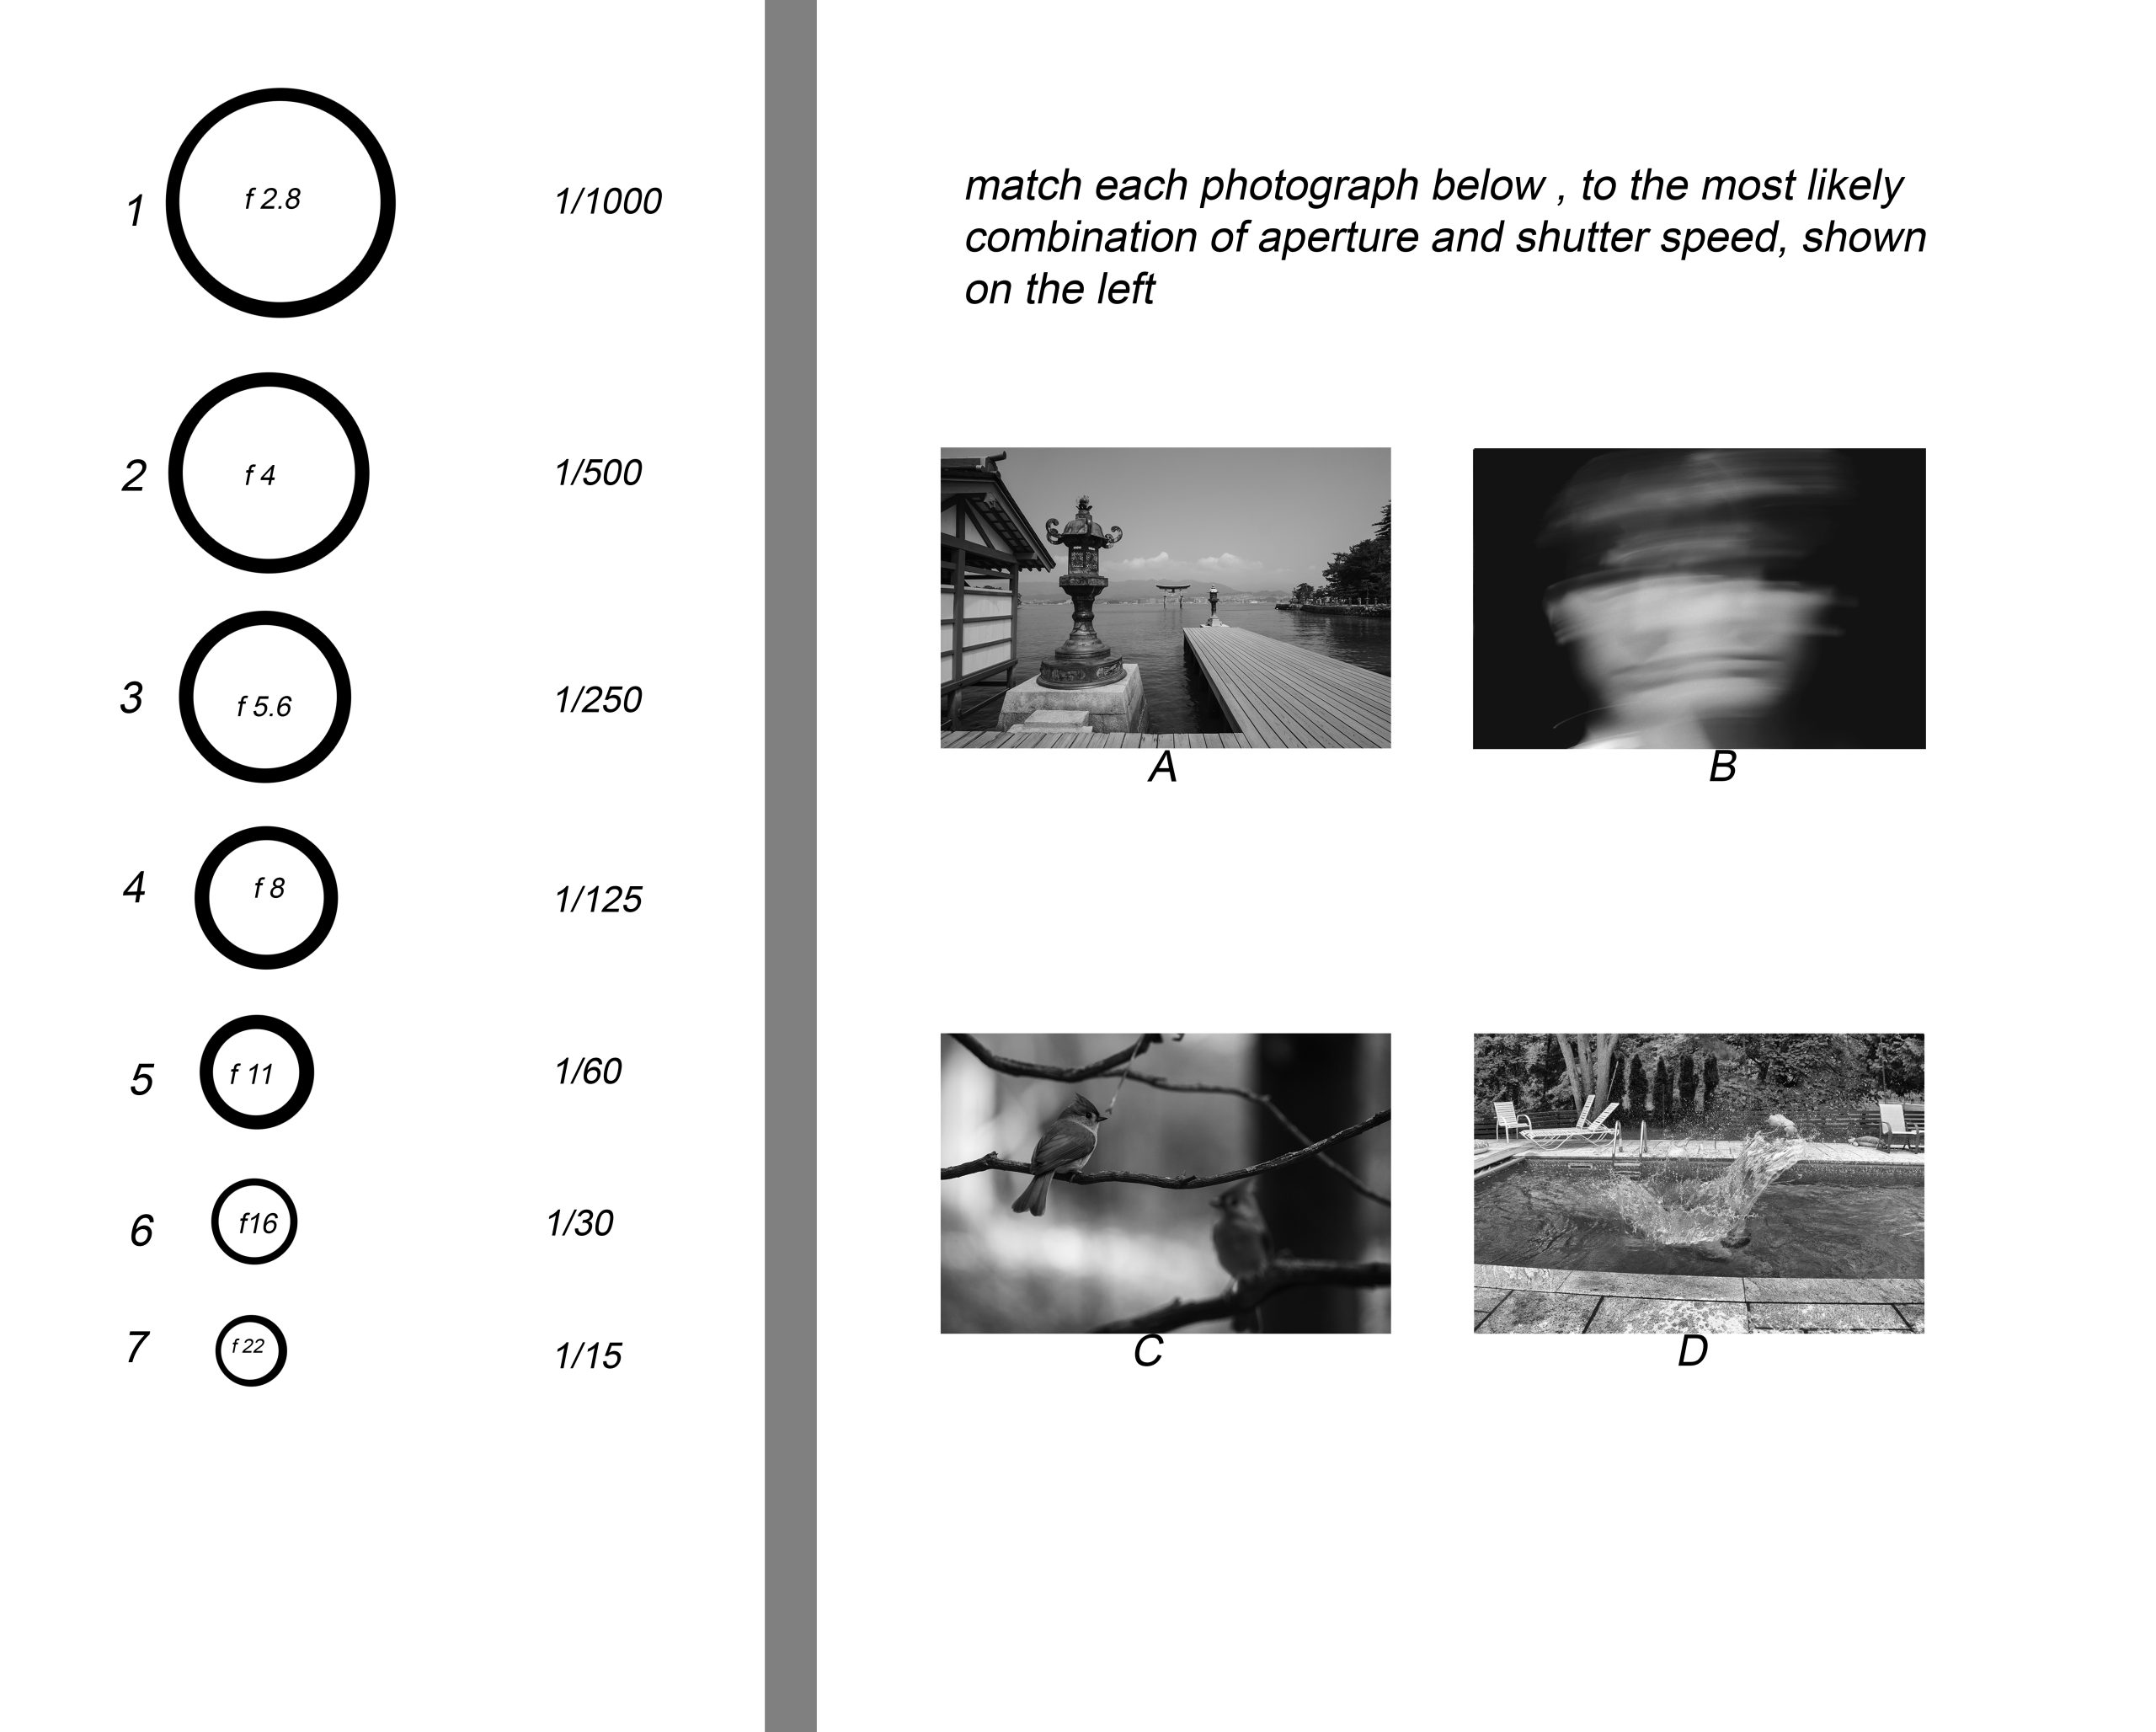 match each photograph below to the most likely combination of aperture and shutter speed shown on the left